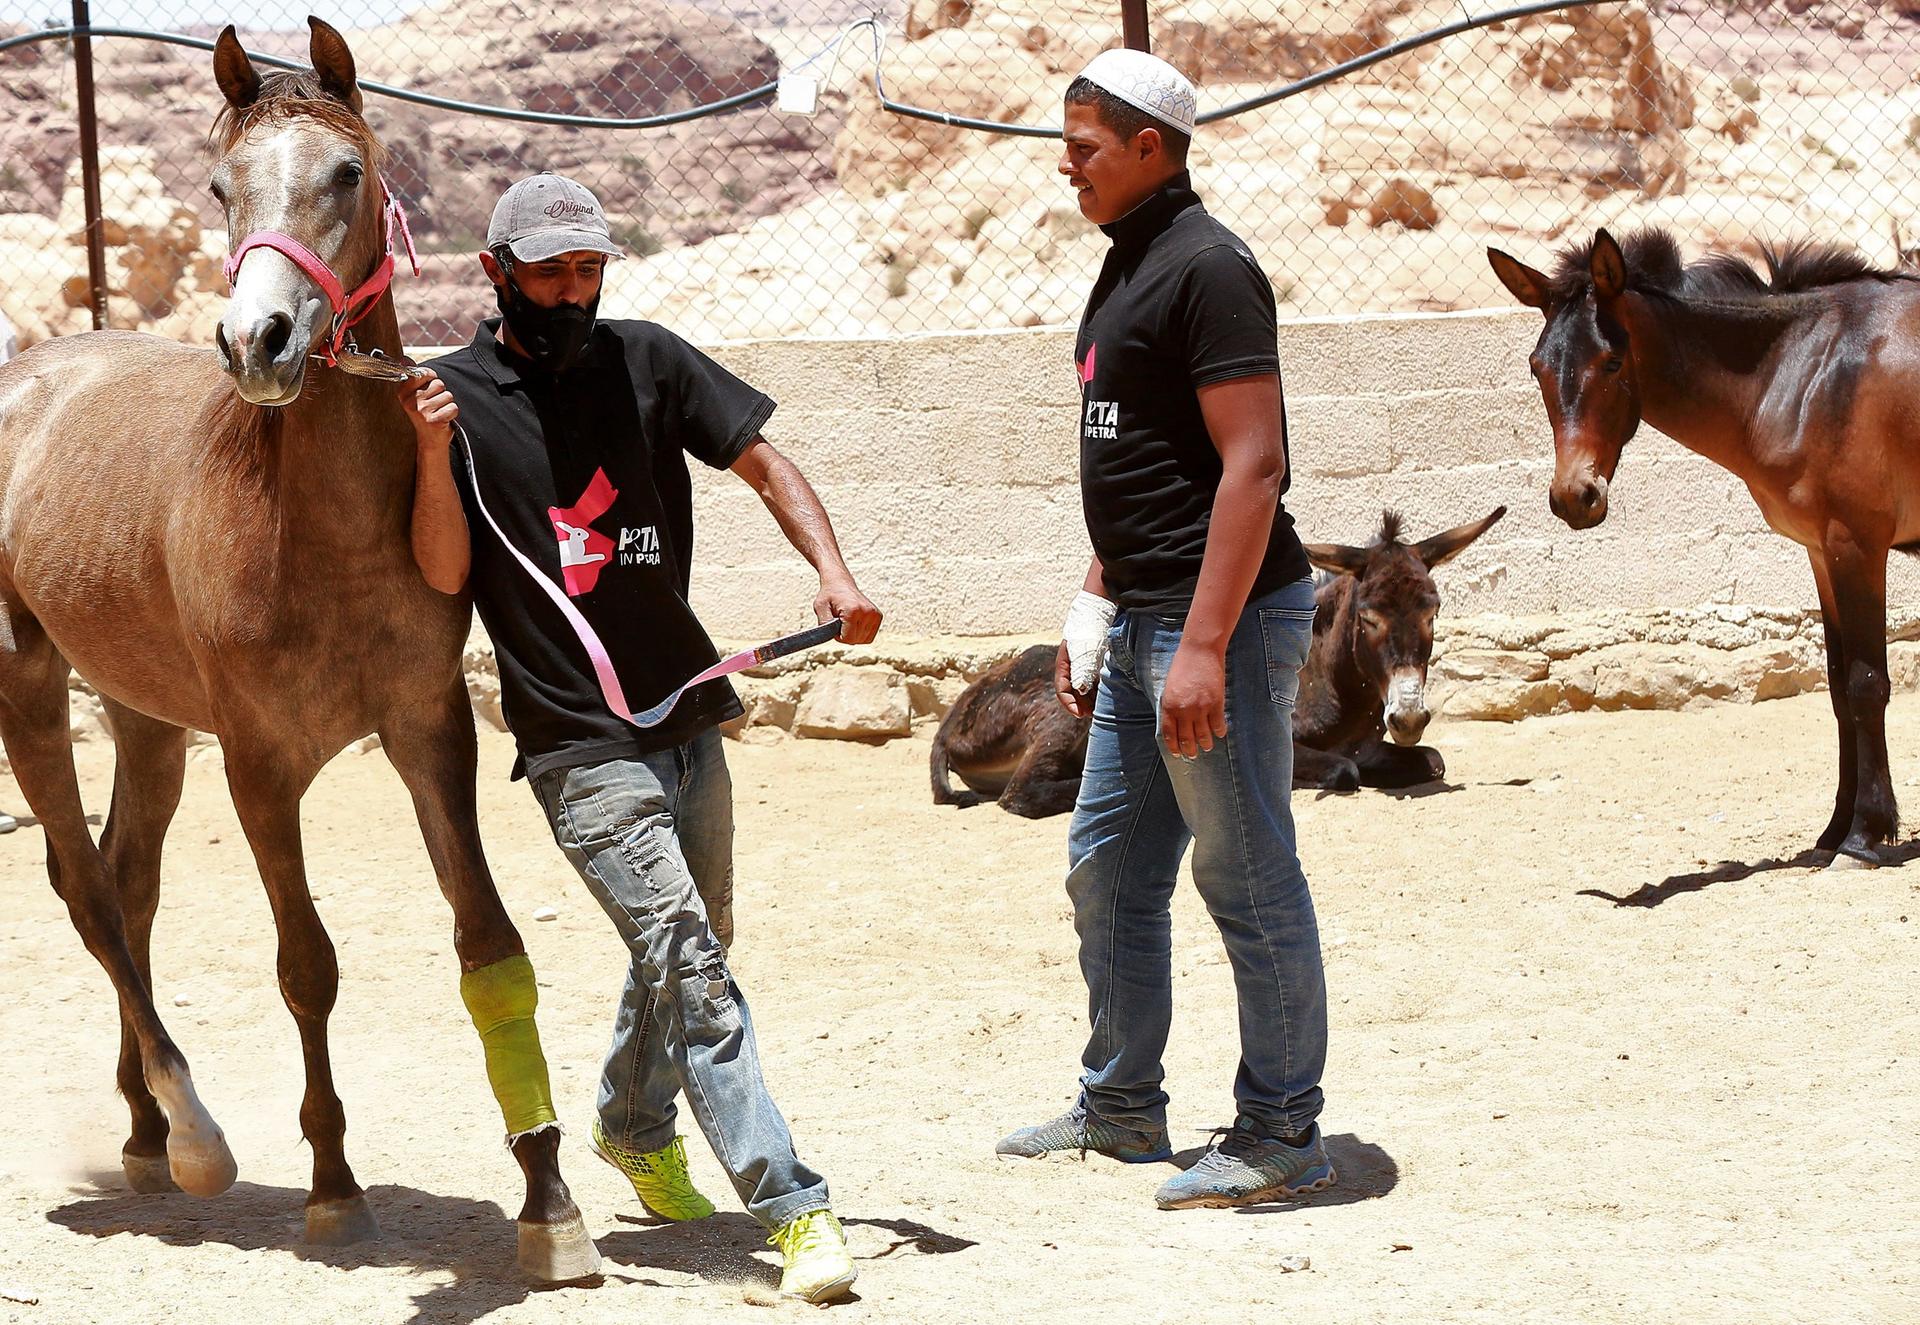 Ping pong shows in Thailand and riding donkeys in Petra: Our biggest travel  regrets